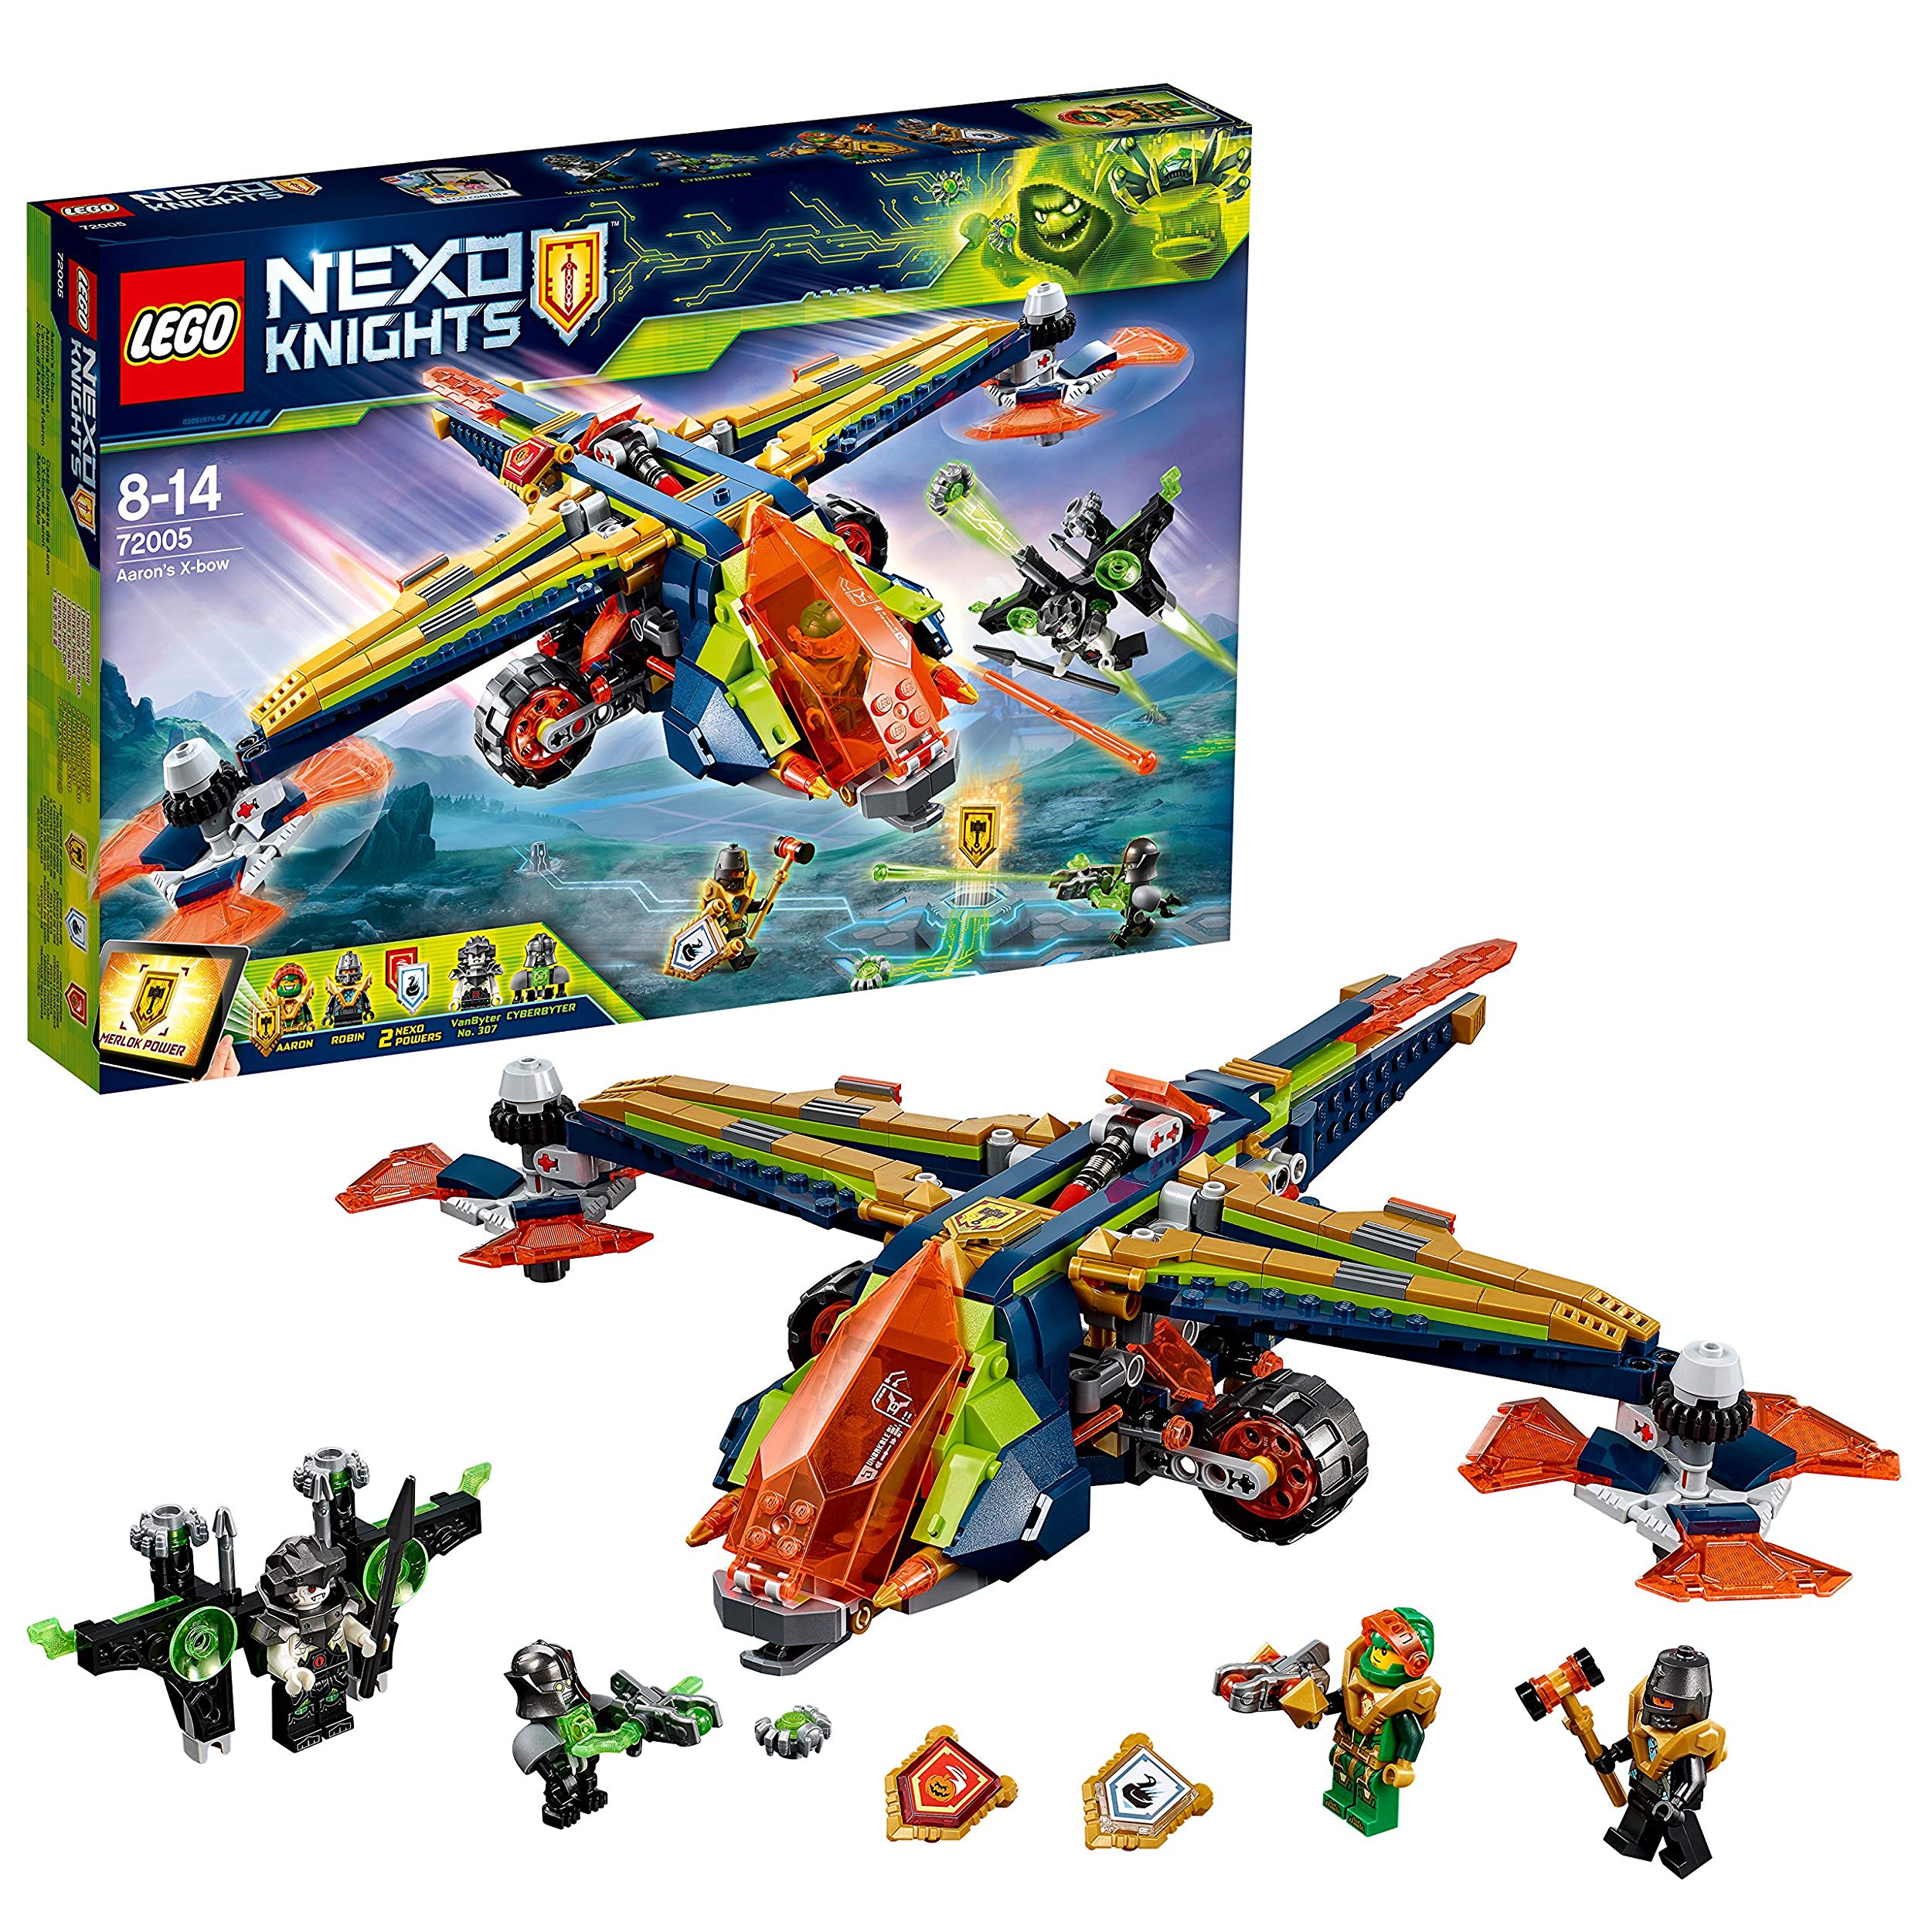 Lego Nexo Knights Aarons Crossbow Entertainment Toy For Children